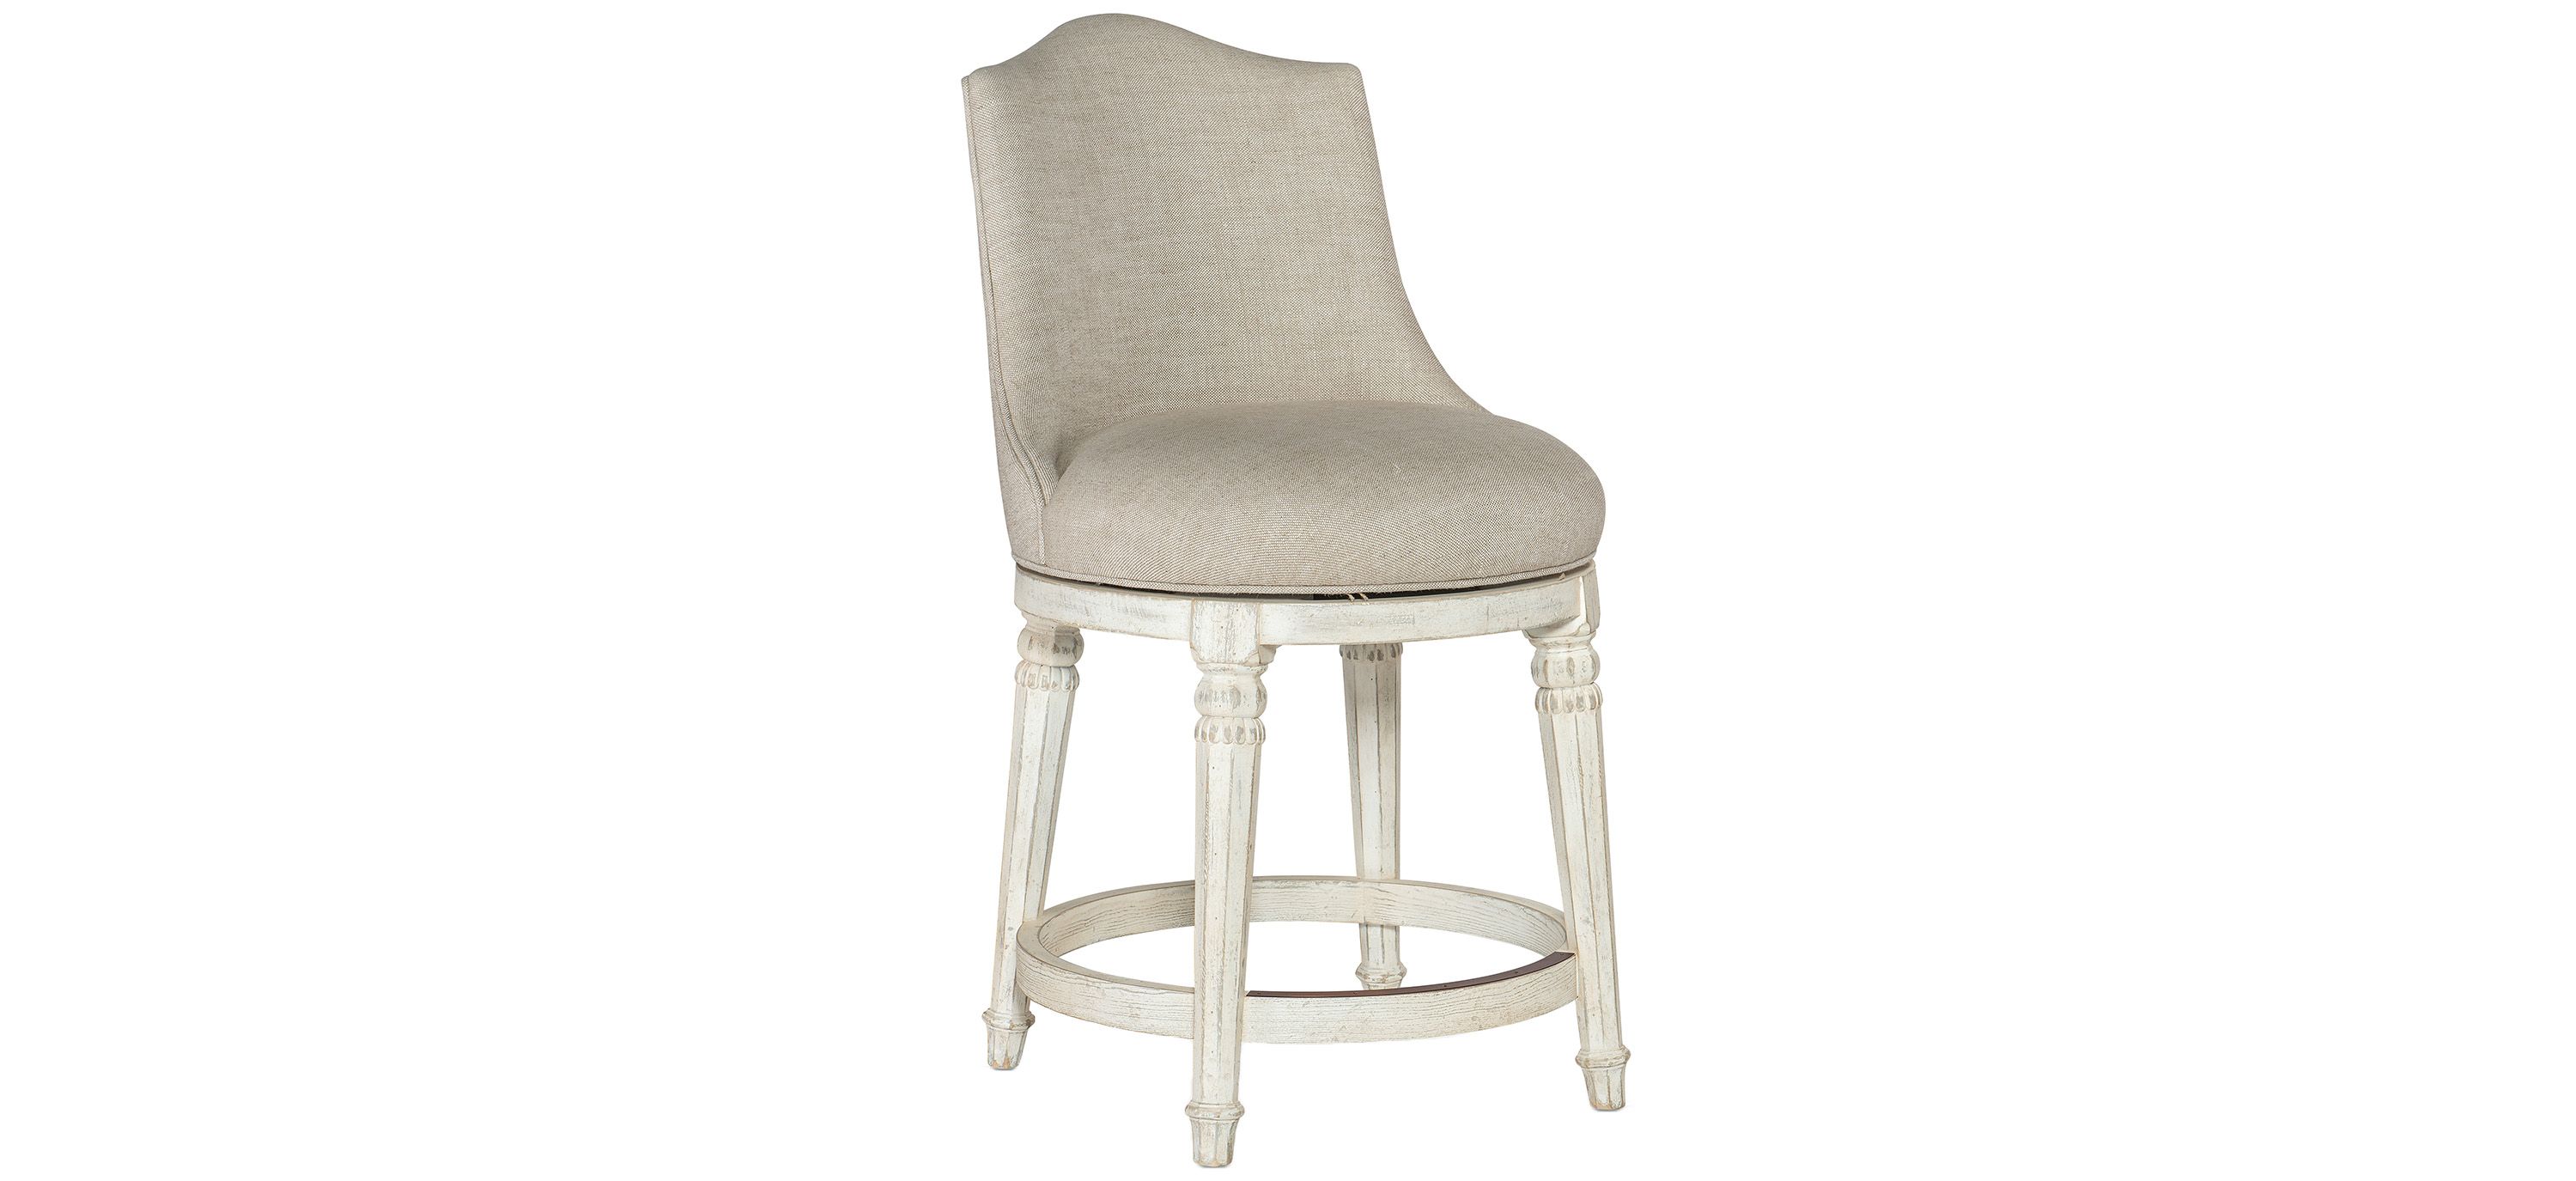 Traditions Counter Stool